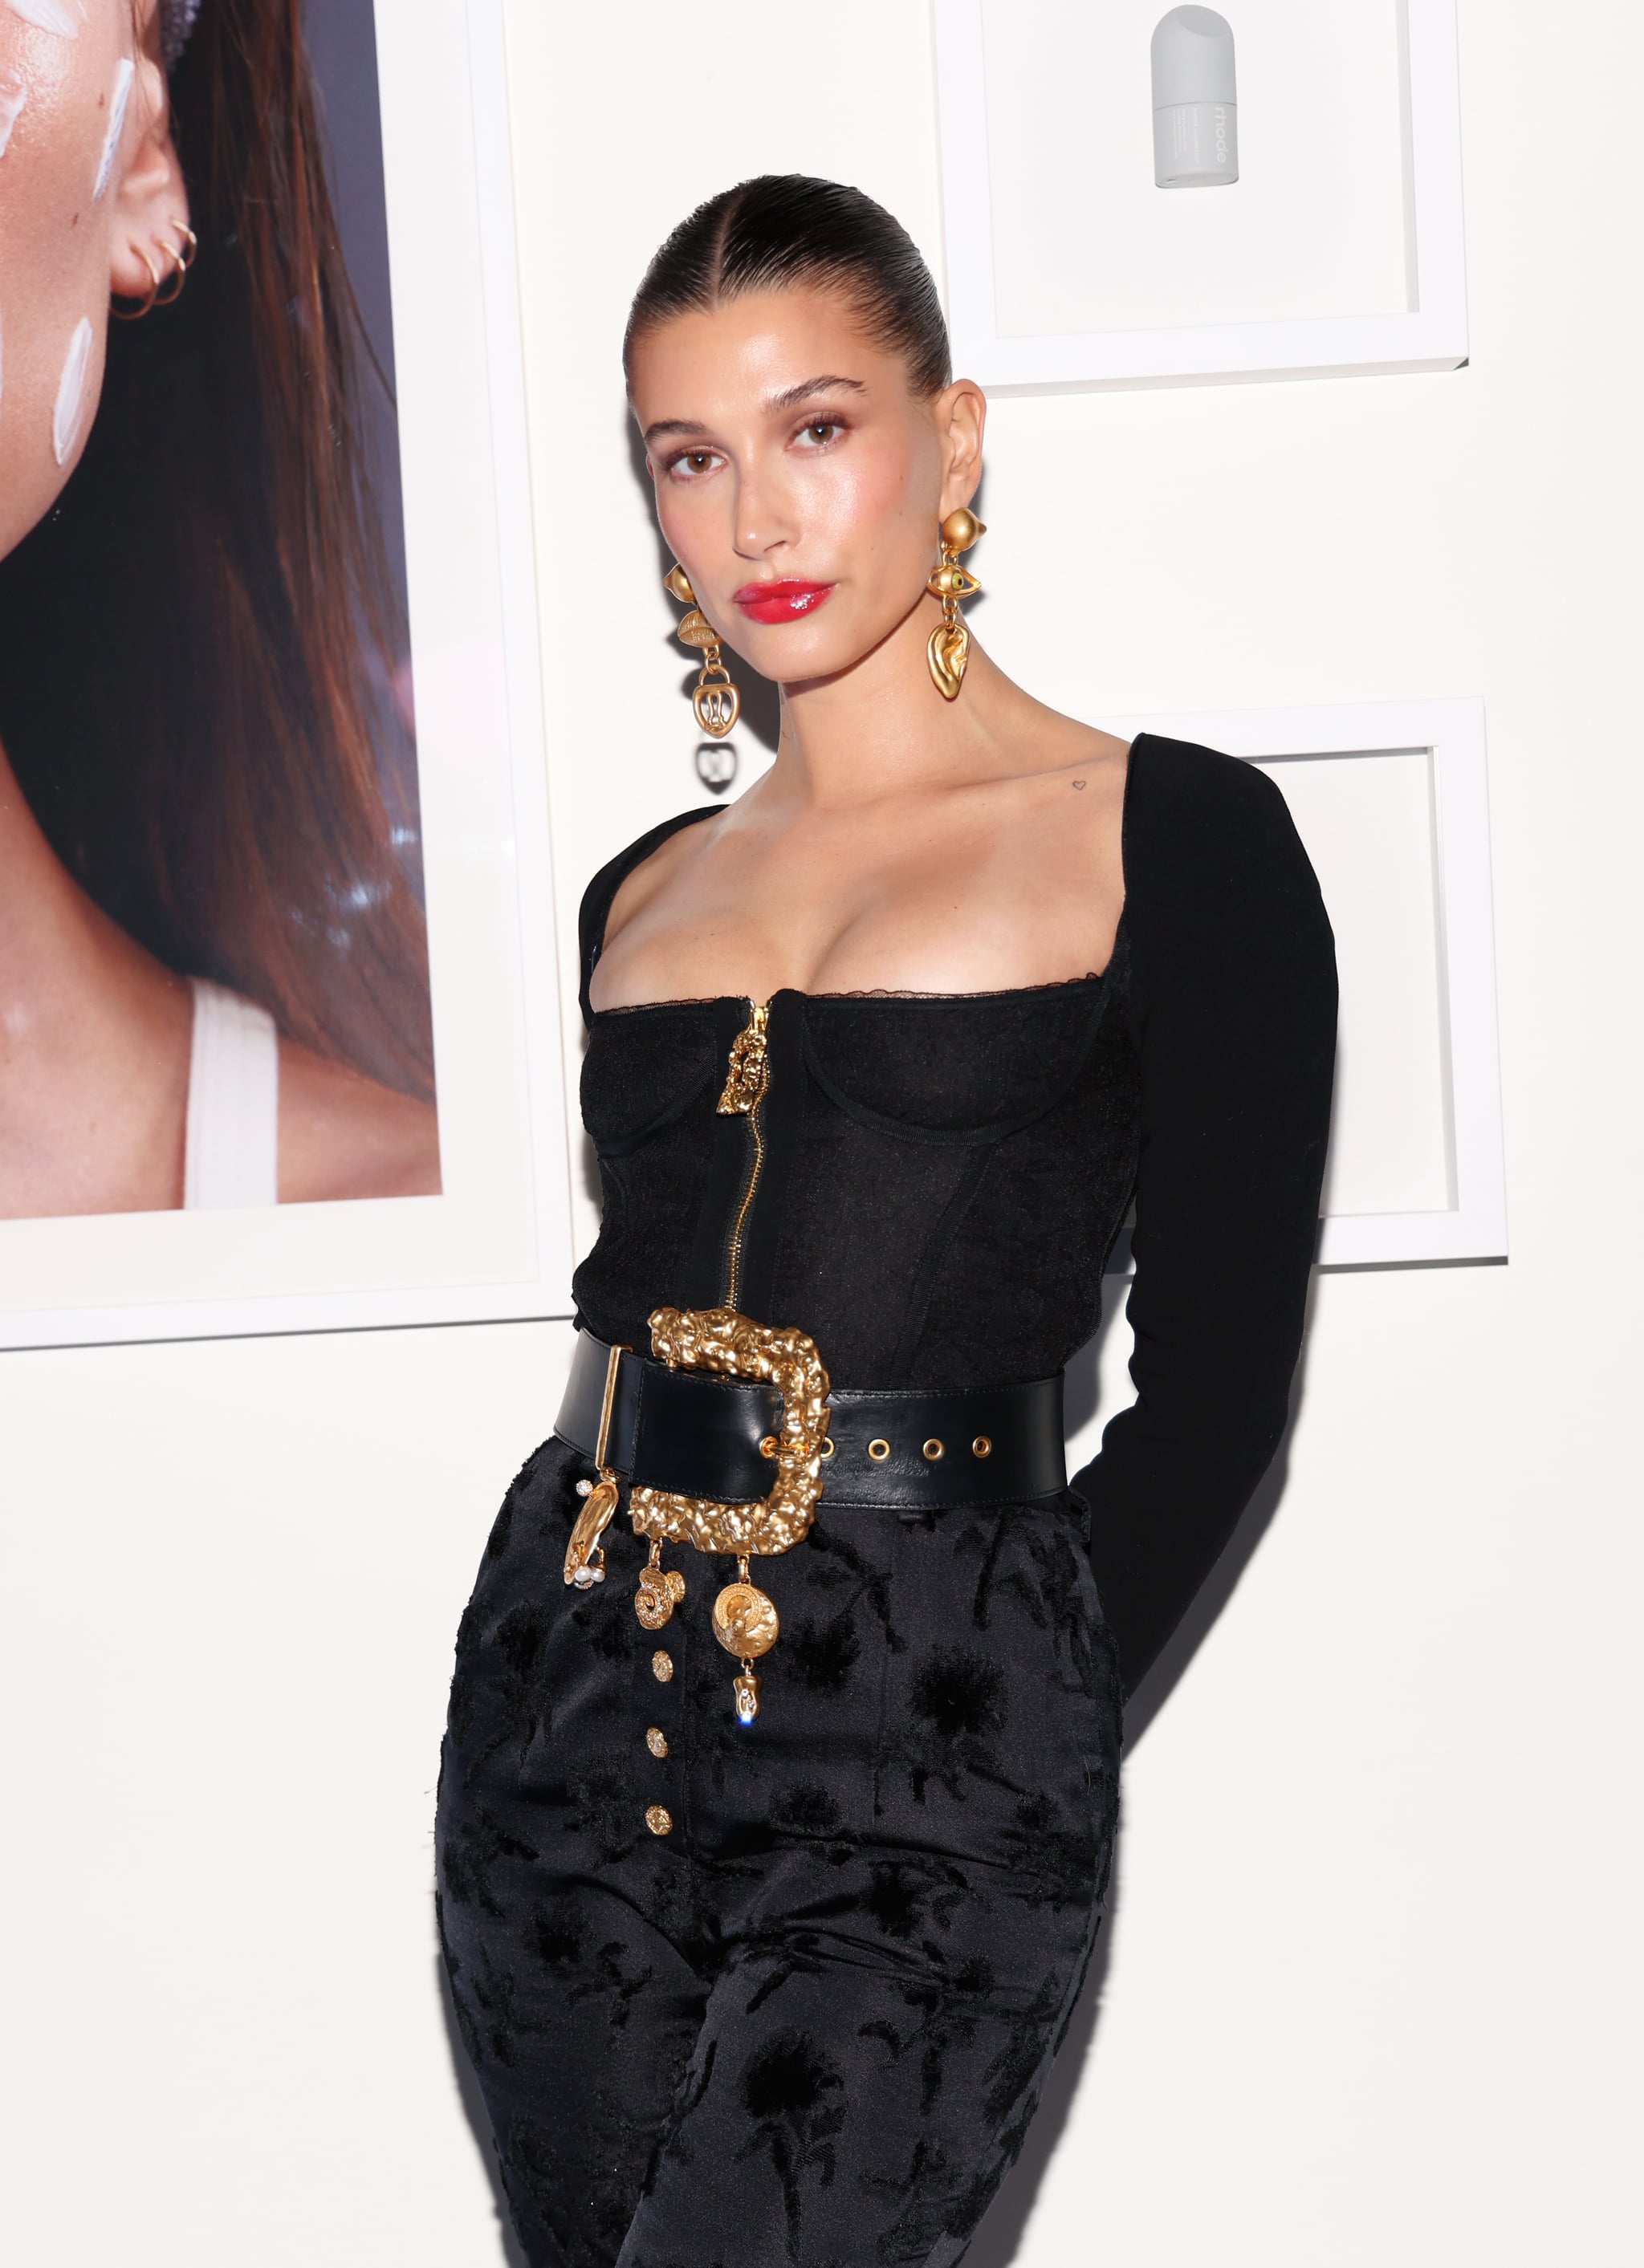 HOLLYWOOD, CALIFORNIA - JANUARY 14: Hailey Bieber attends OBB Media's Grand Opening of OBB Studios on January 14, 2023 in Hollywood, California. (Photo by Jerritt Clark/Getty Images for OBB Media)